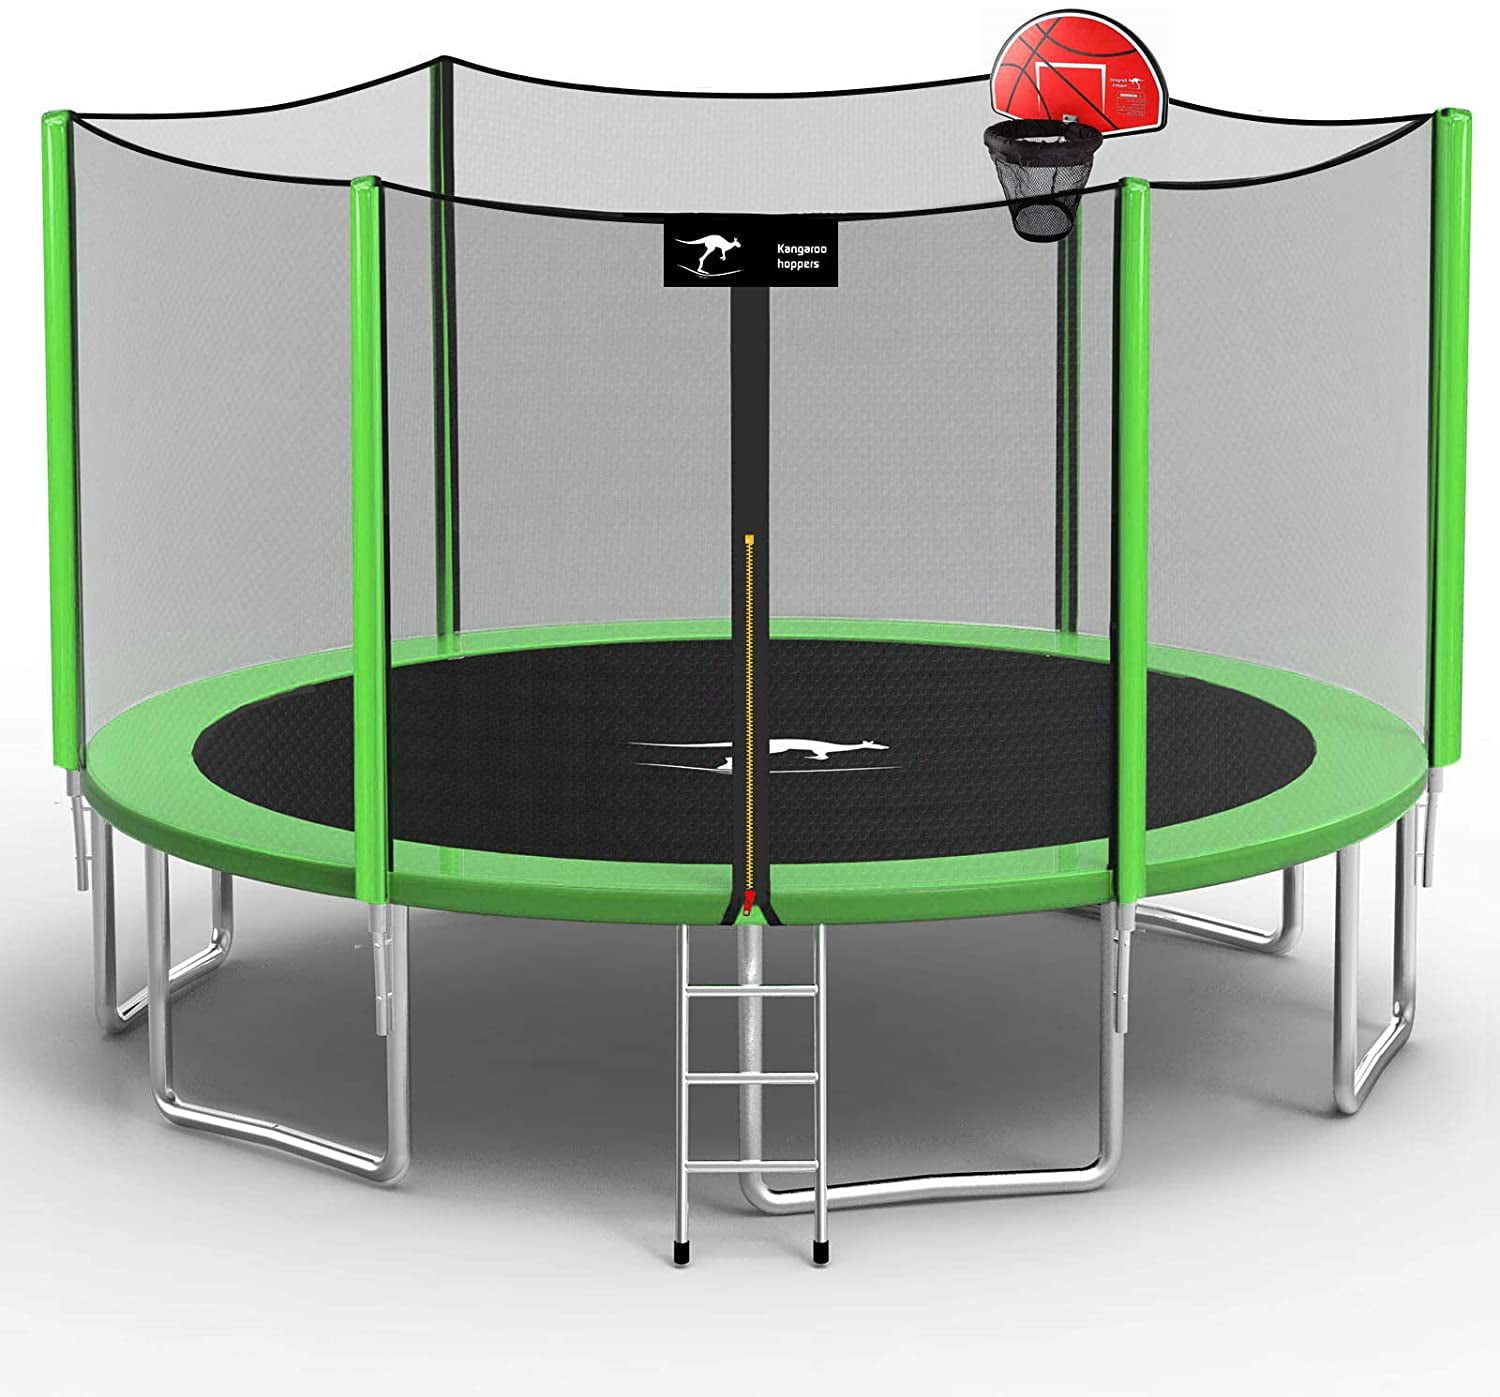 Kangaroo Hoppers 12/14/15 FT Trampoline with Safety Enclosure Net ...